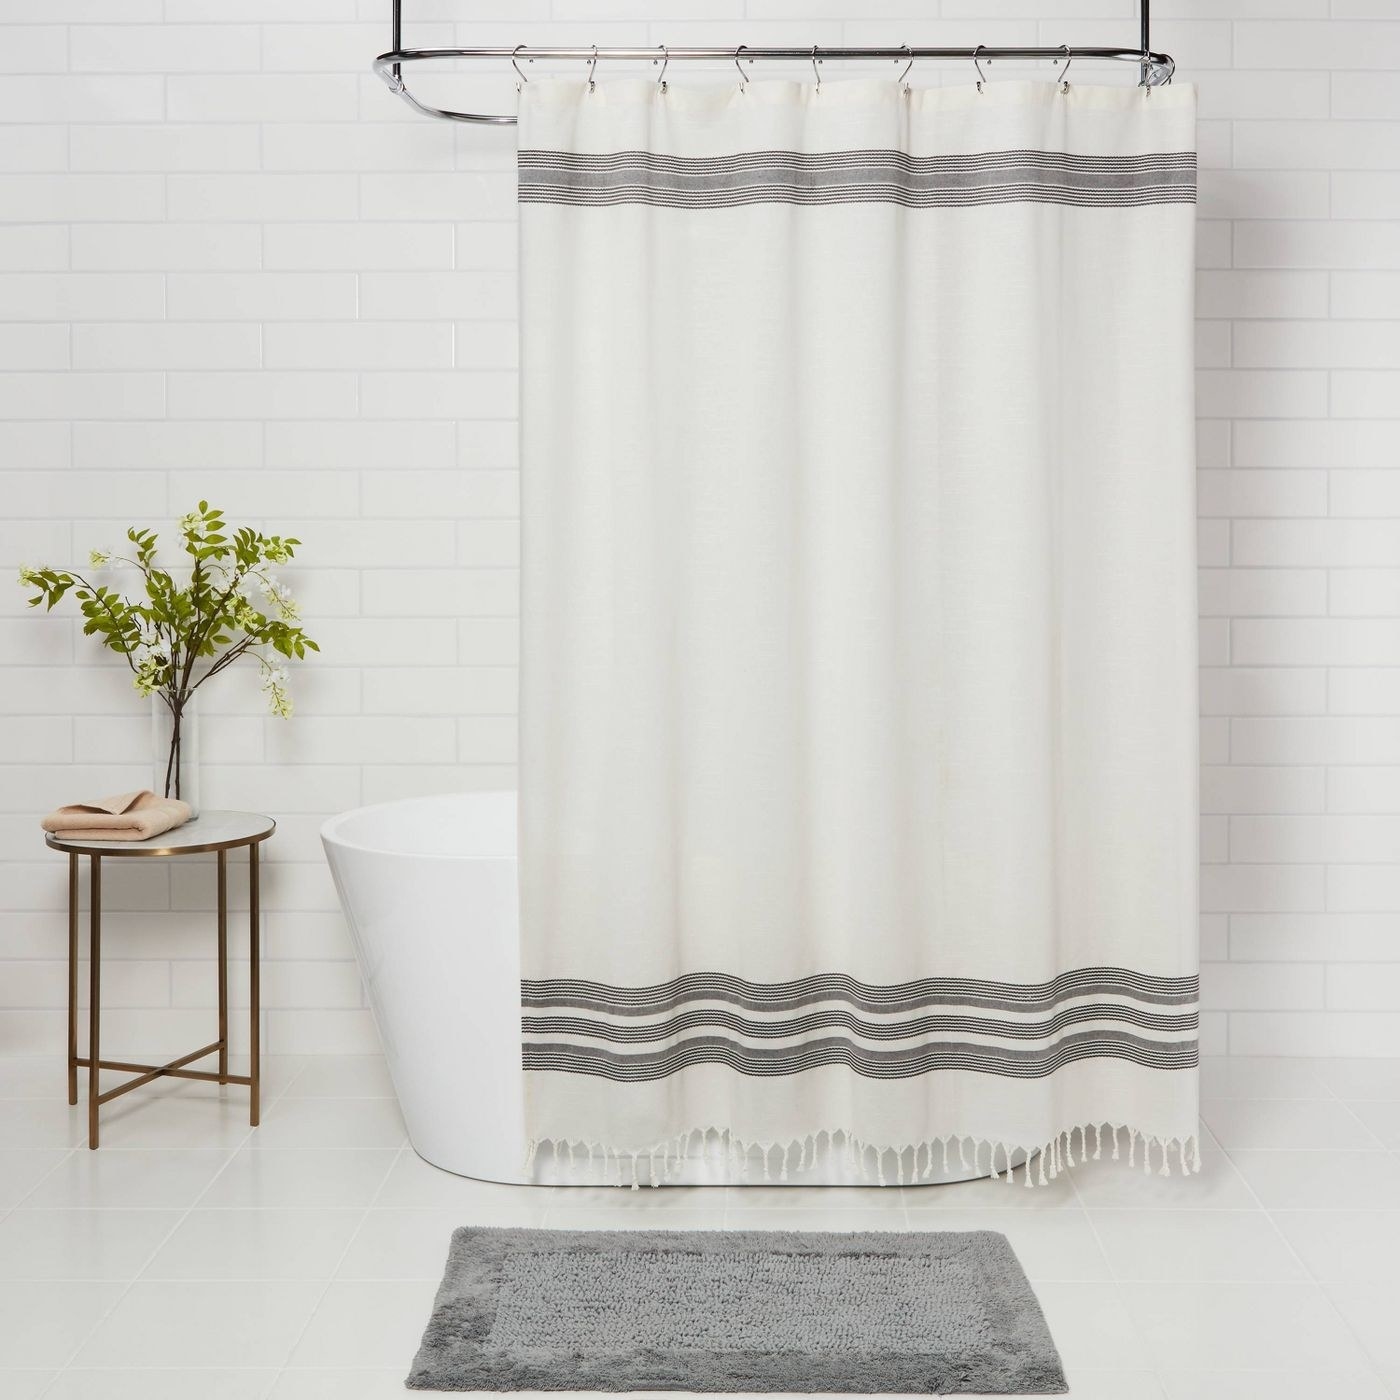 white shower curtain with gray stripes and fringe at the bottom